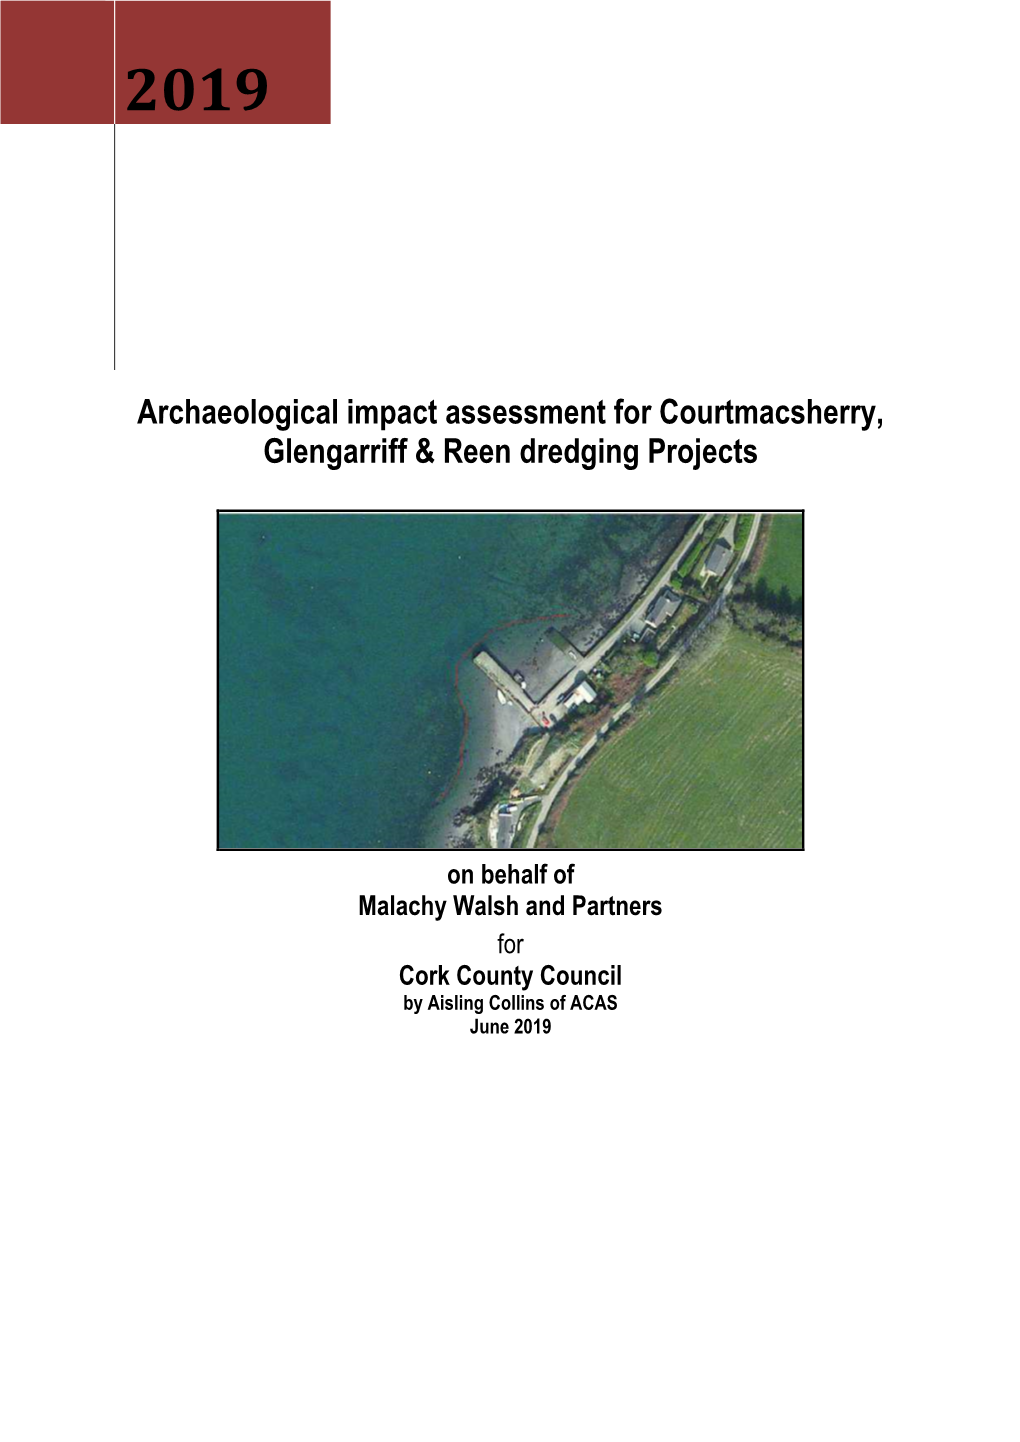 Archaeological Impact Assessment for Courtmacsherry, Glengarriff & Reen Dredging Projects